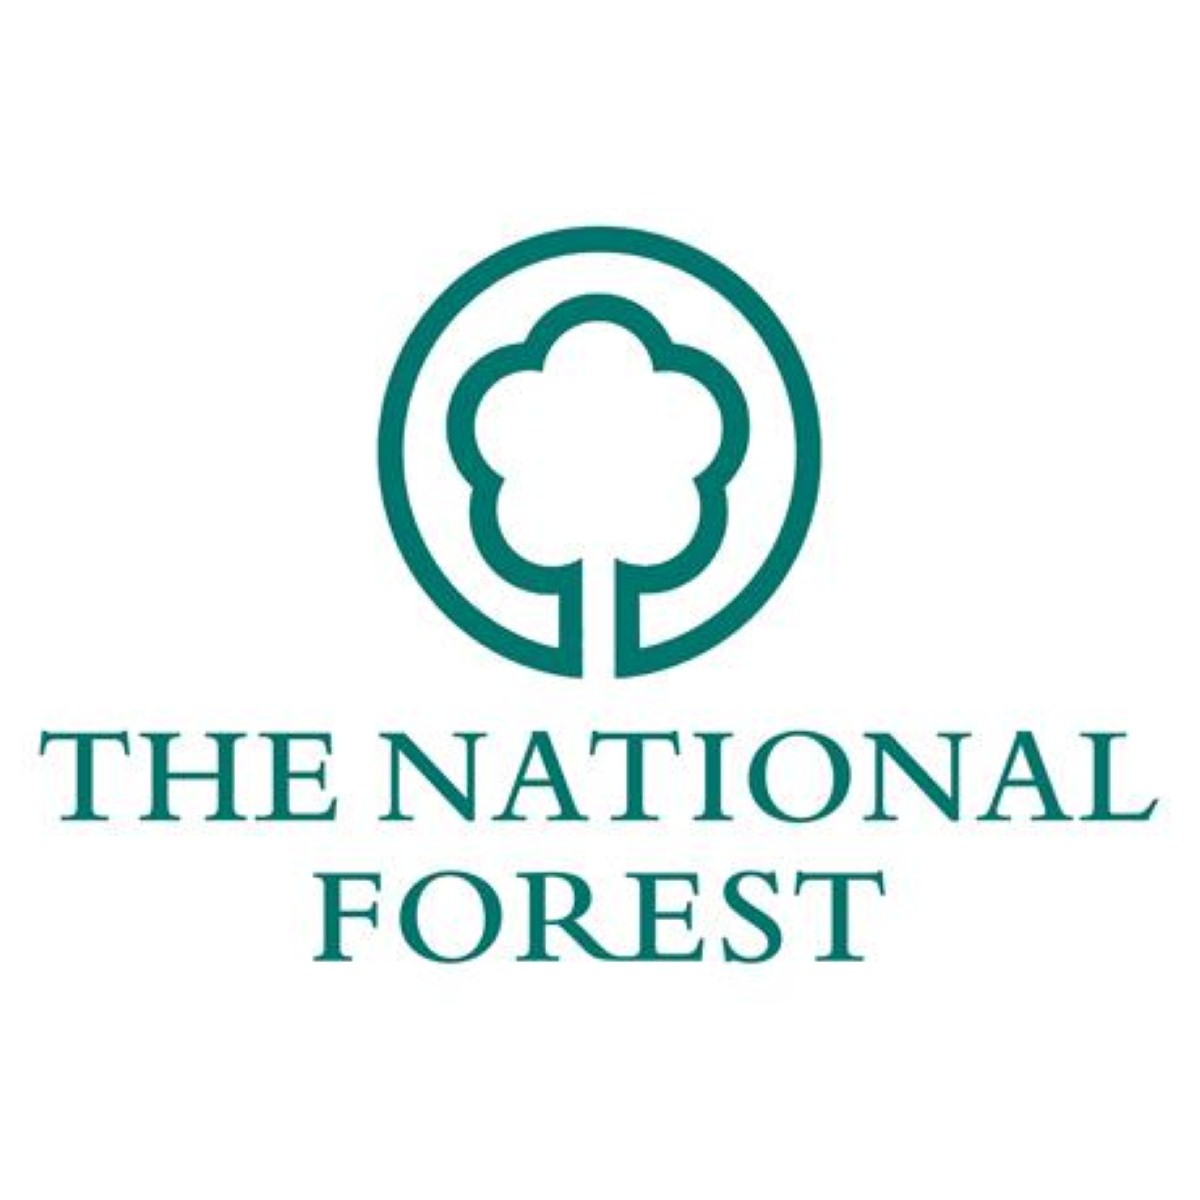 A number of events are set to take place in the Midlands' National Forest